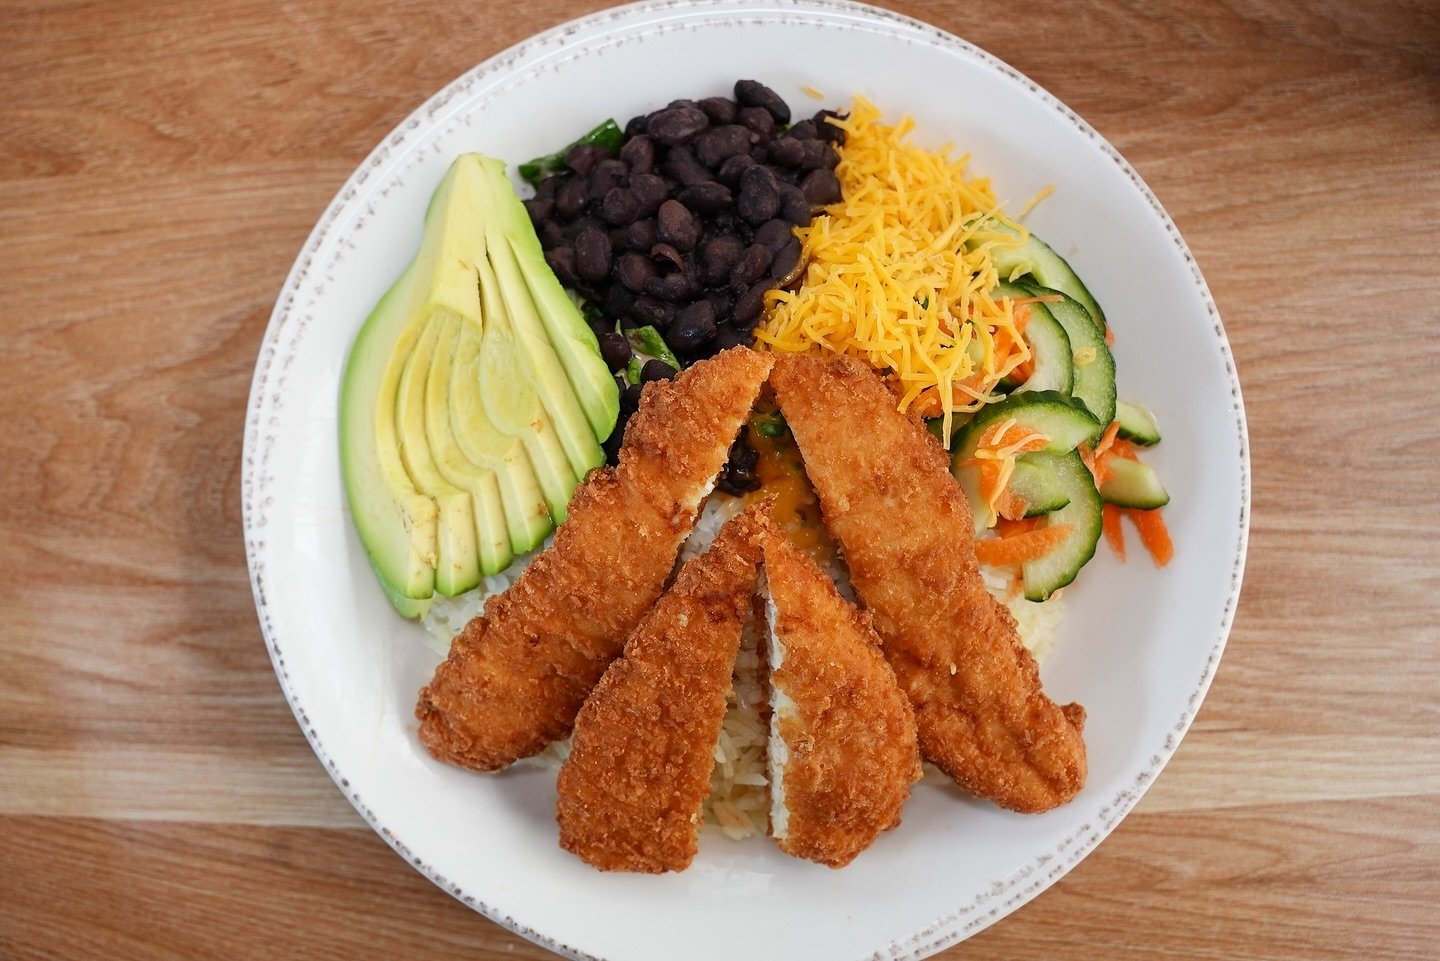 Golden chicken tenders, ripe avocado slices, hearty black beans, and a crisp salad mix for a delicious meal. 

#FreshEats #gardena #southbay #familyownedbusiness #delicious